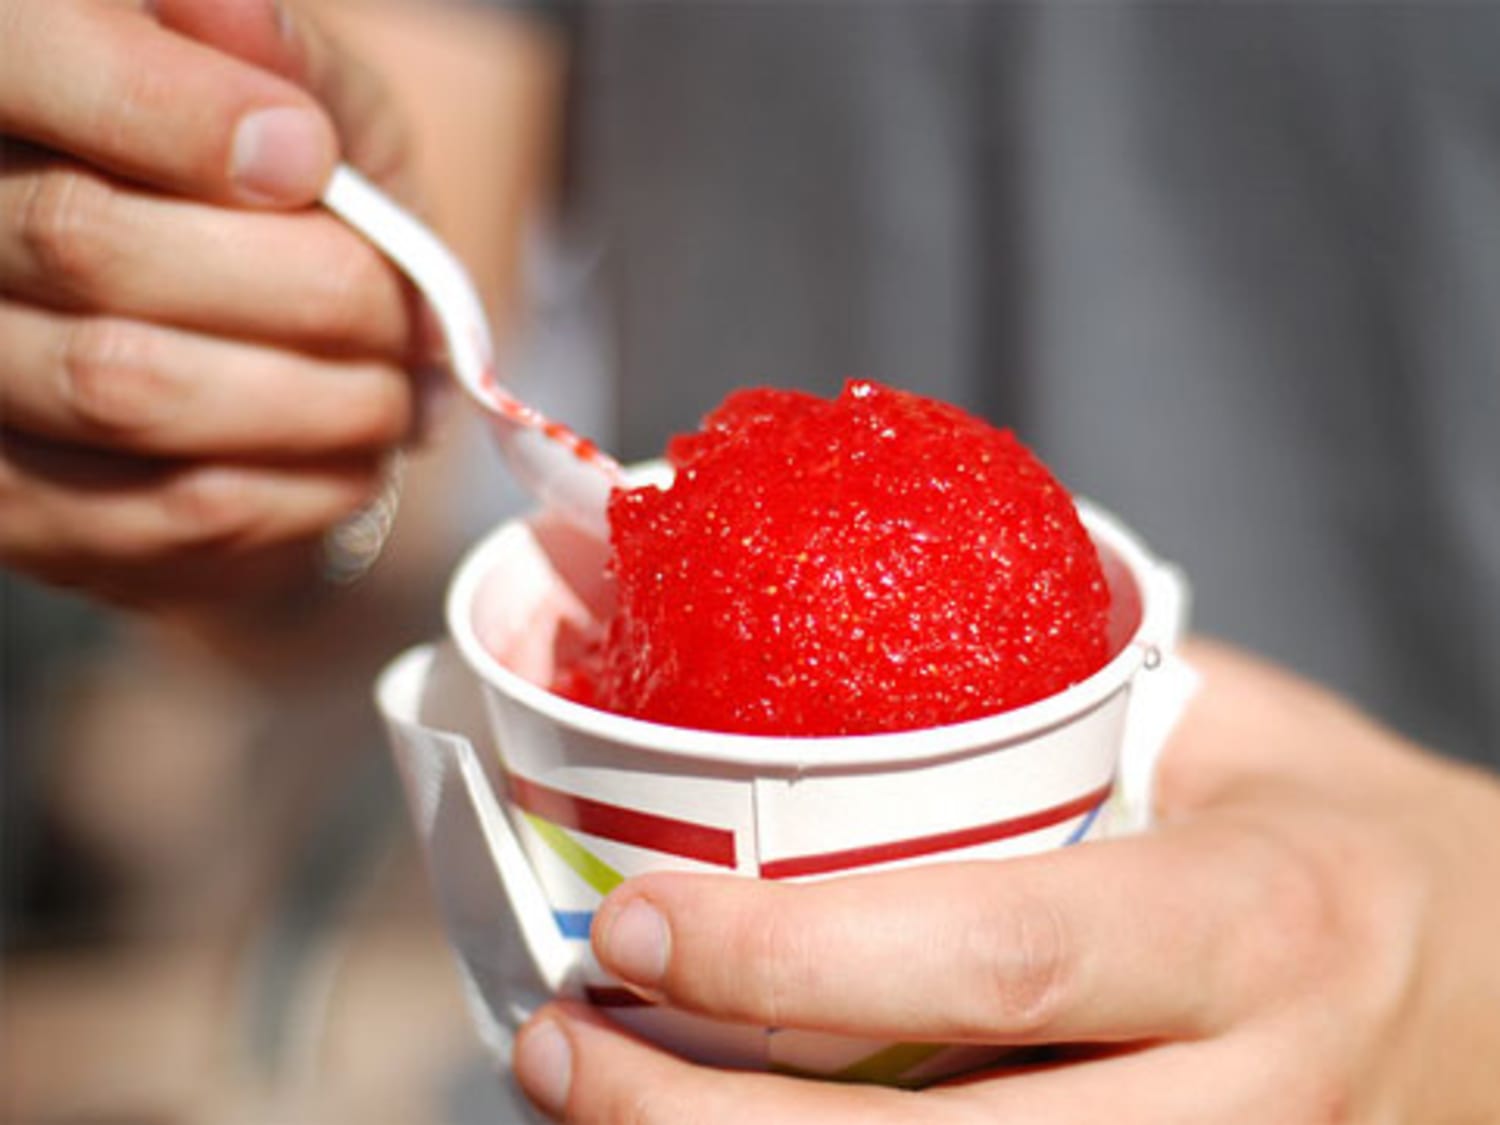 In a snacktime slump? Use the Shave Ice Attachment to craft a special